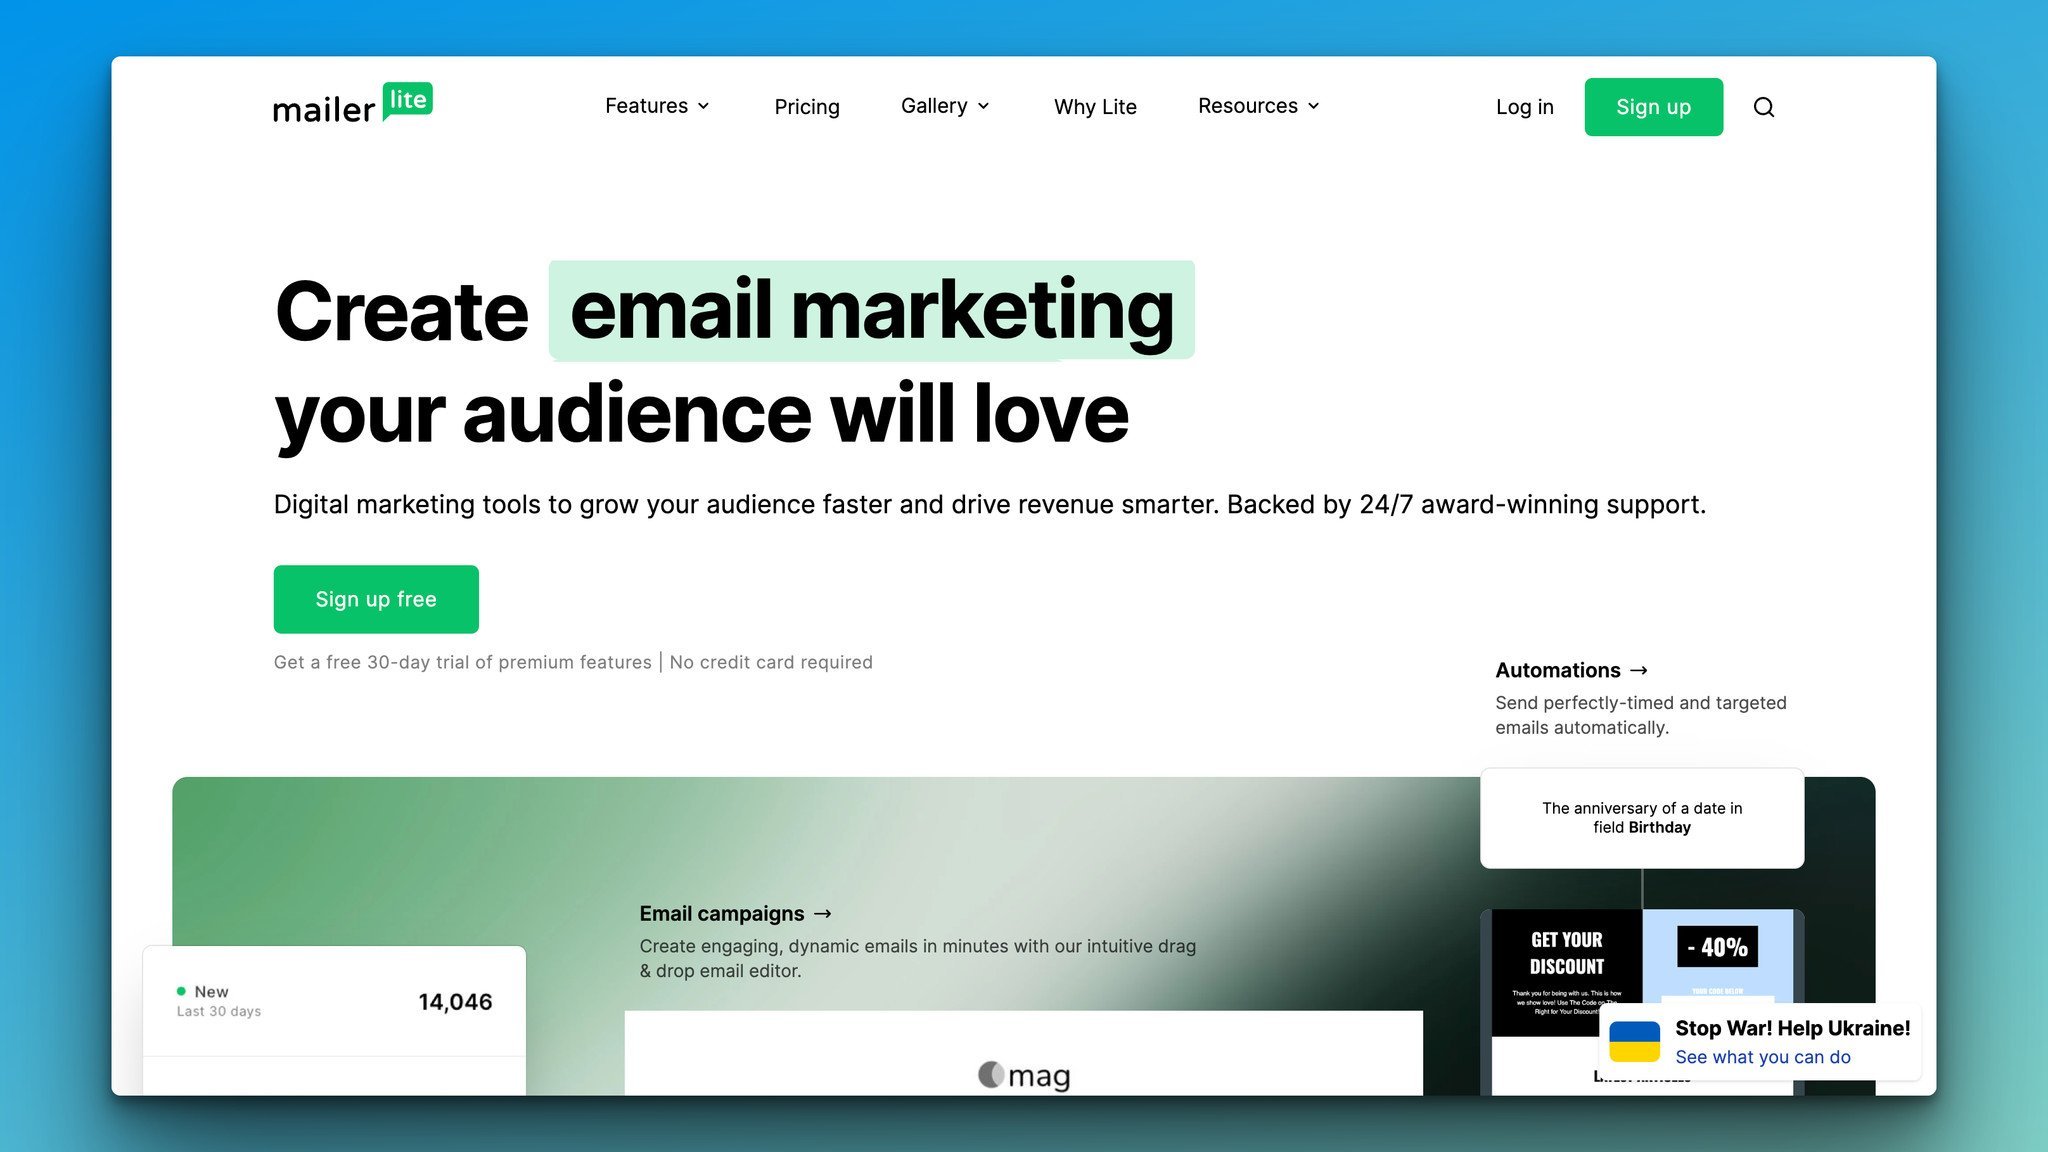 Mailerlite’s homepage with “Create email marketing your audience will love” headline followed by Sign up free button and product preview